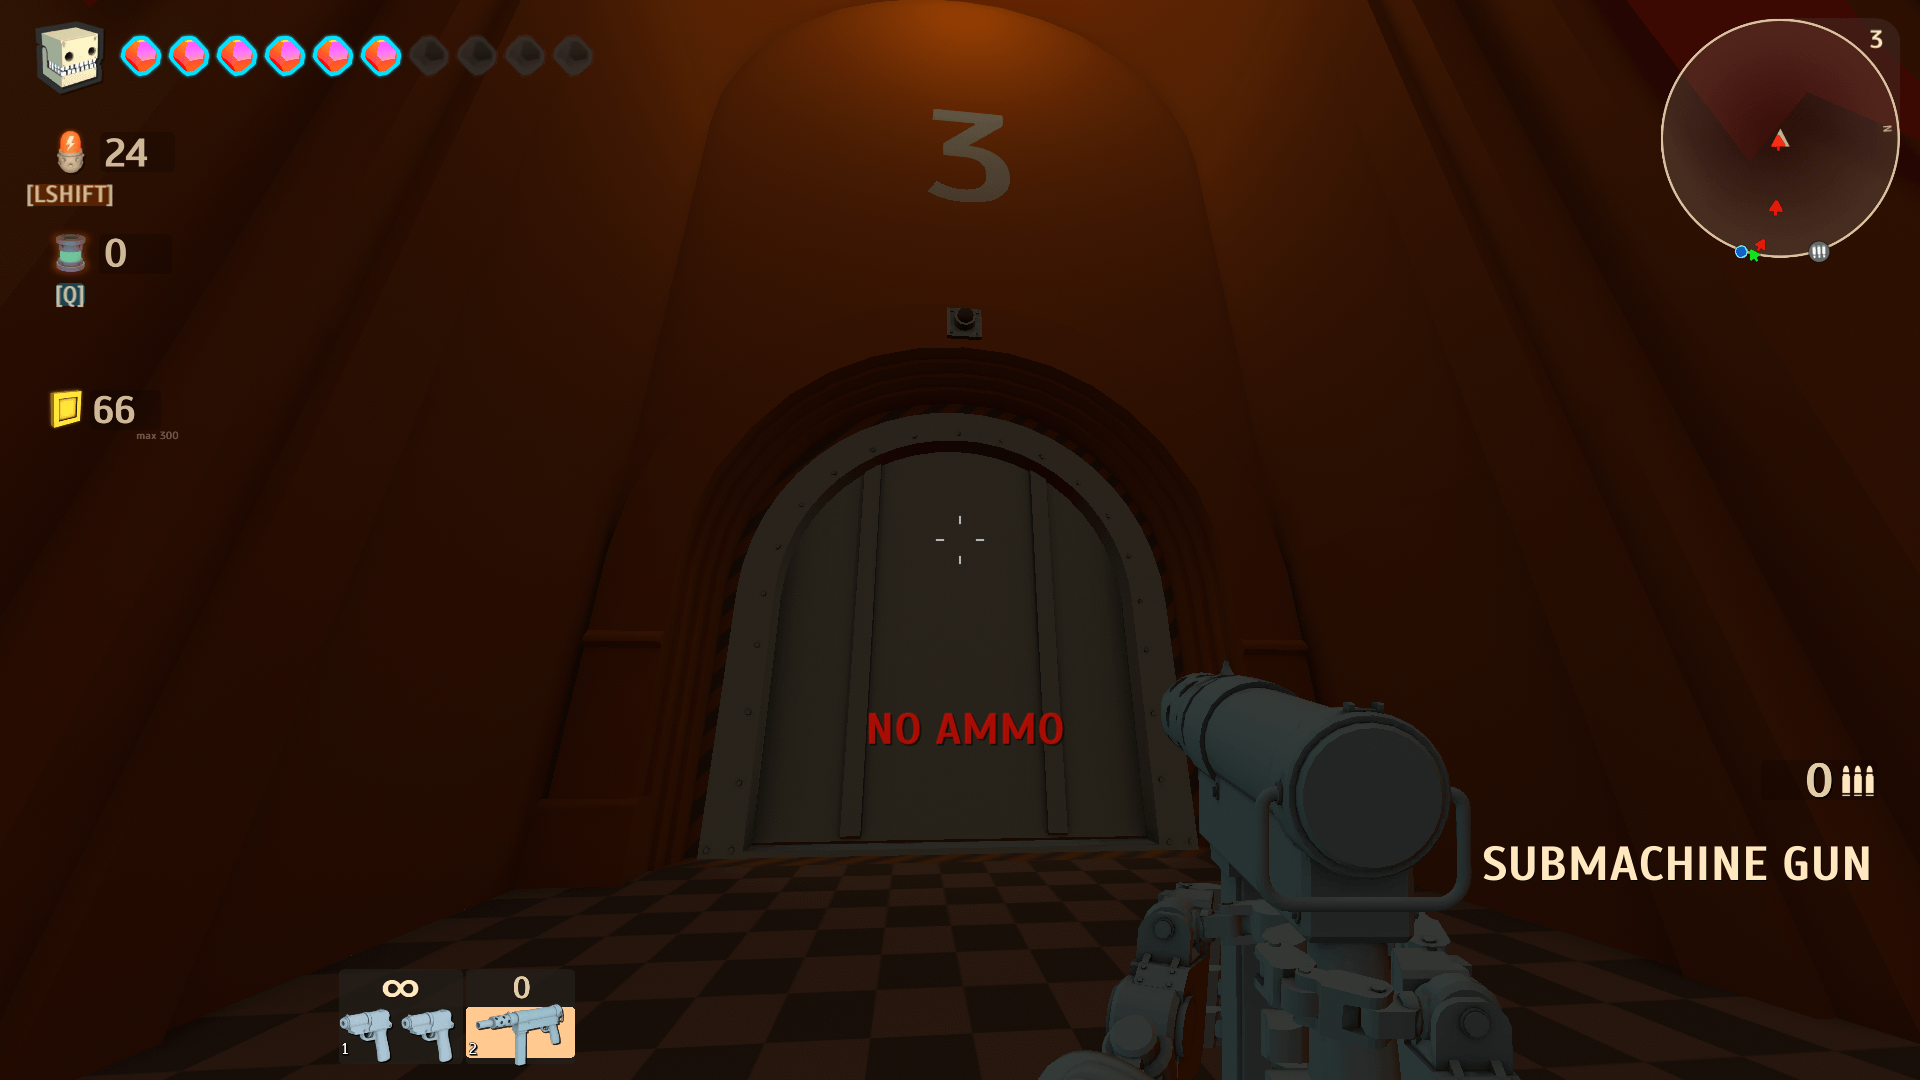 No ammo screenshot of ARMORED HEAD video game interface.